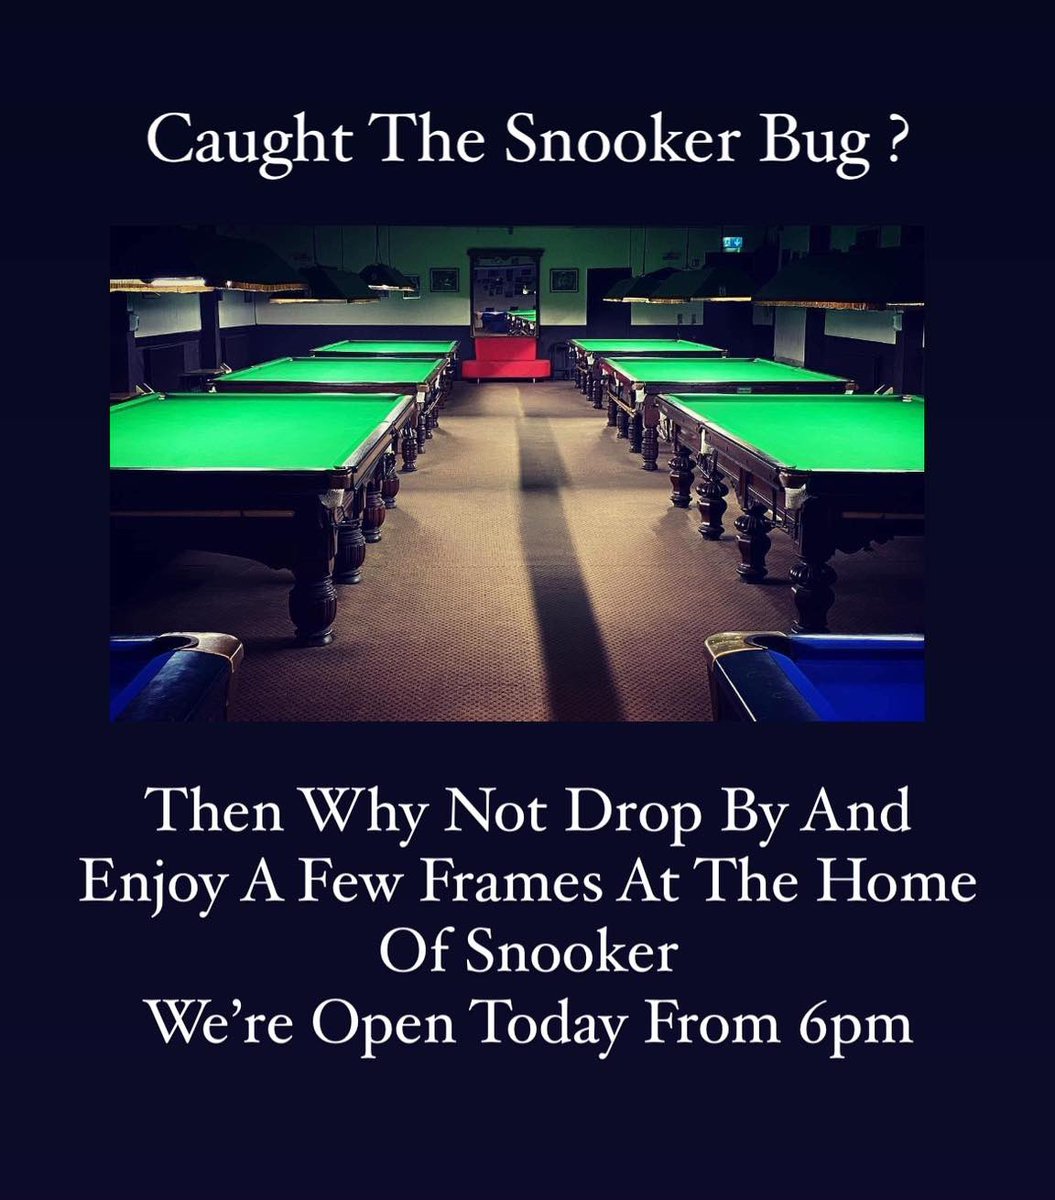 The Old Club Is Back Open From 6pm With The Cheapest Rates In Dublin 👍

Don’t Forget Your Complimentary Tea And Coffee Too 🫖☕️

The Famous CrossGuns Welcome Awaits You 🤝

#crossguns #thehomeofsnooker  #snookerclub #oldschool #snookerseason